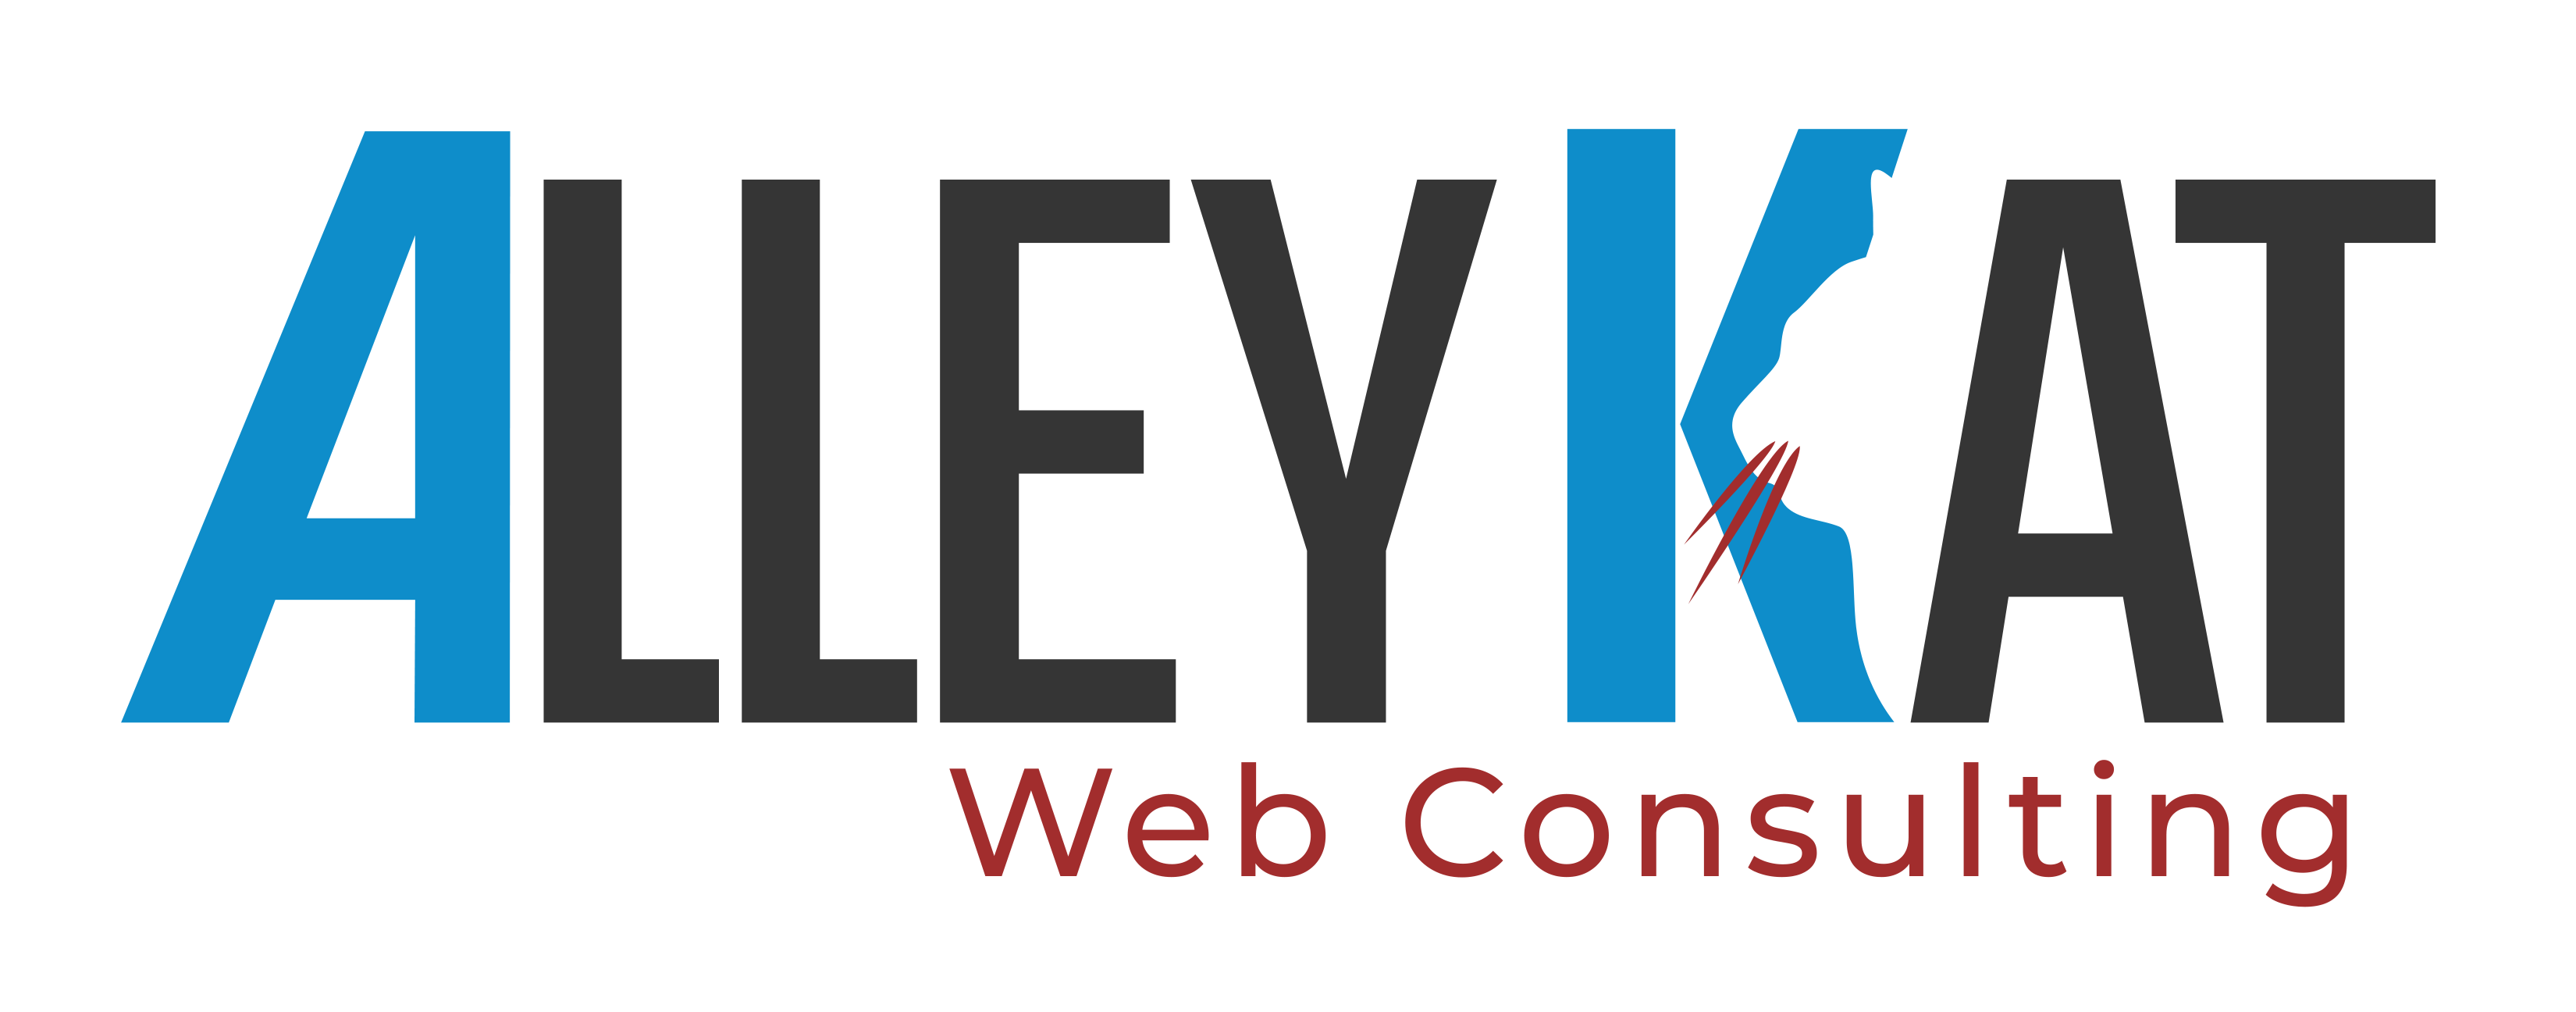 Alley Kat Web Consulting Logo